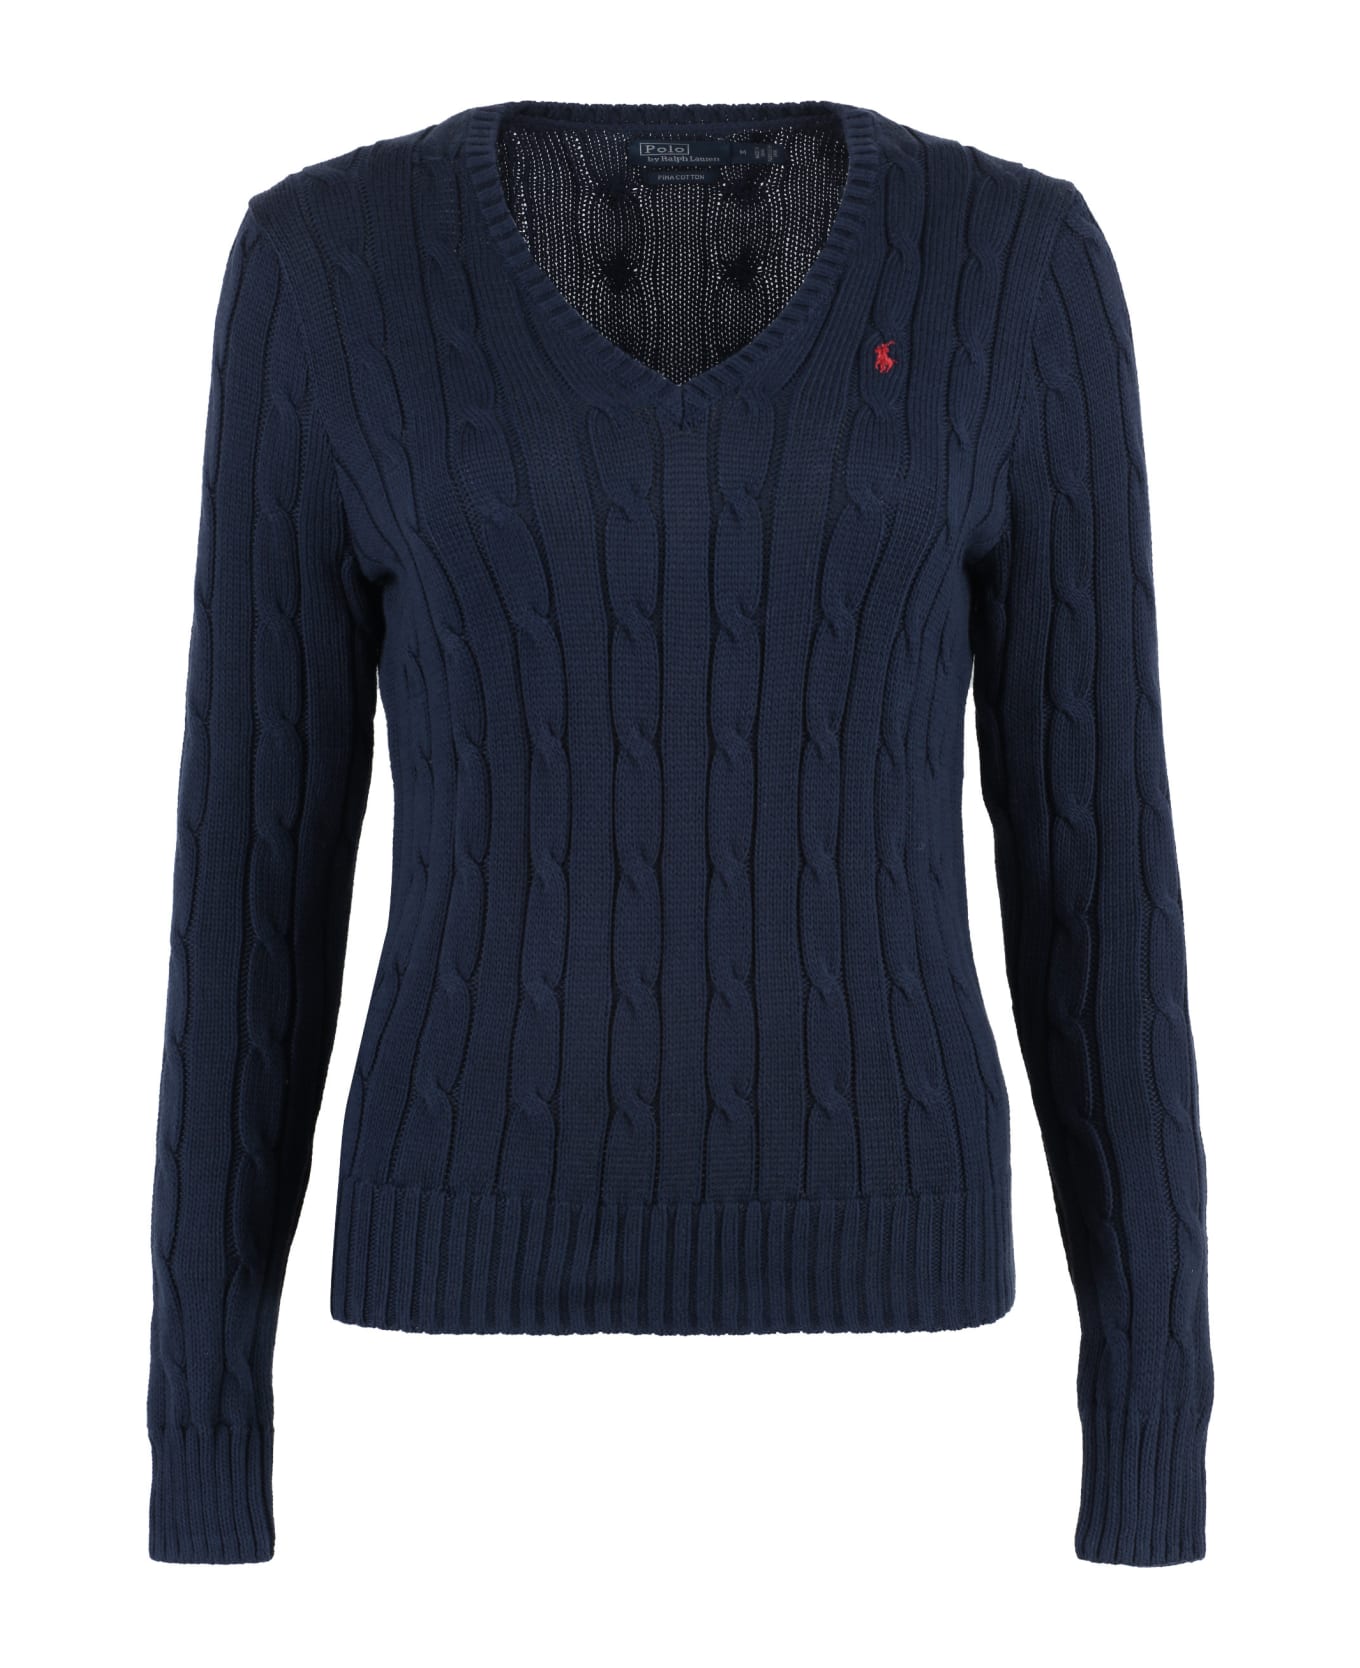 Polo Ralph Lauren Cable Knit Sweater - Blue ニットウェア